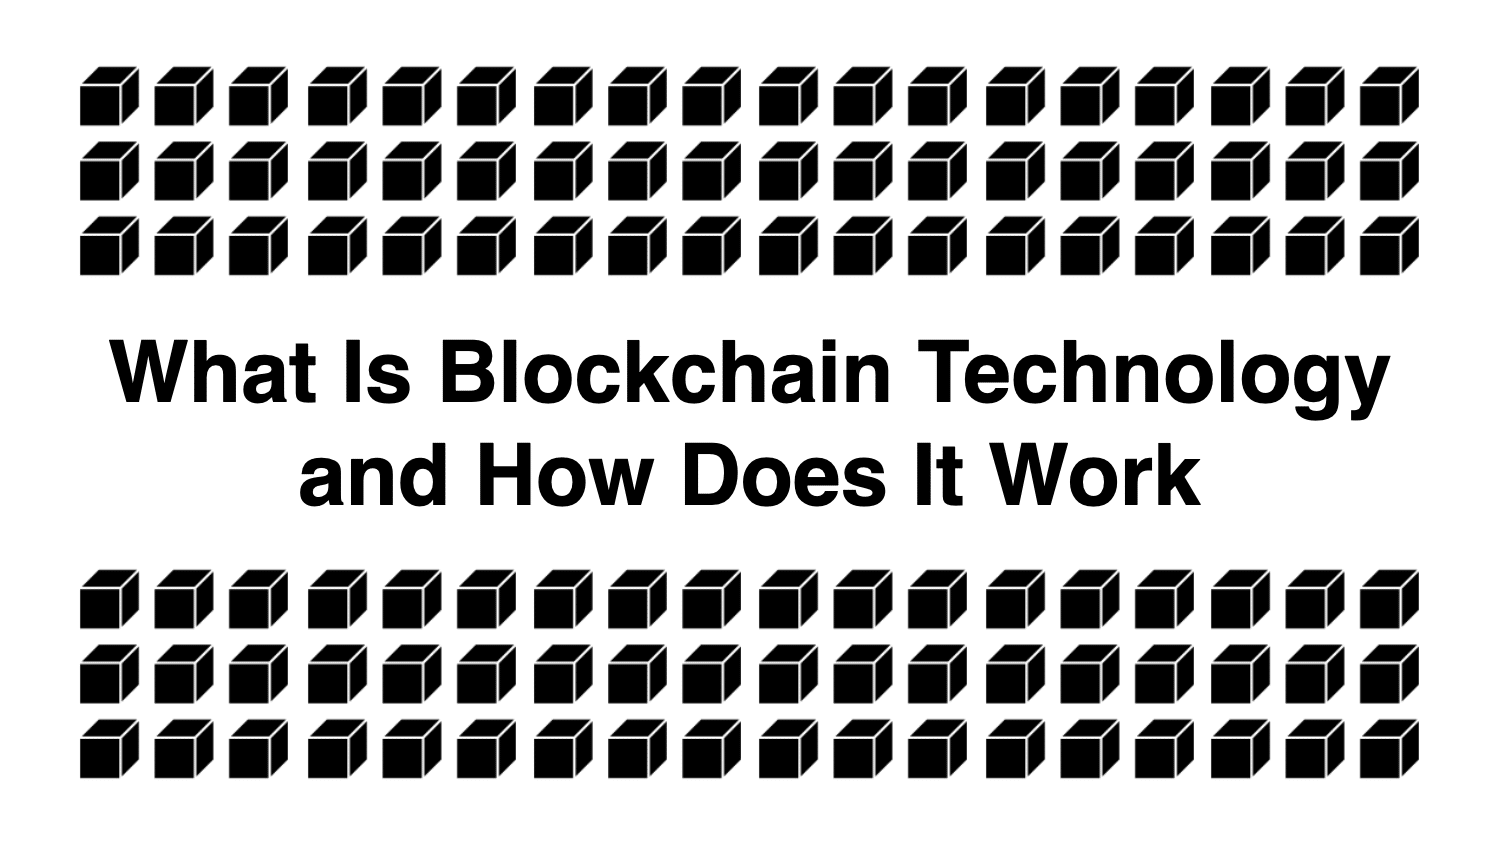 Blockchain Certification: How to Become a Blockchain Expert